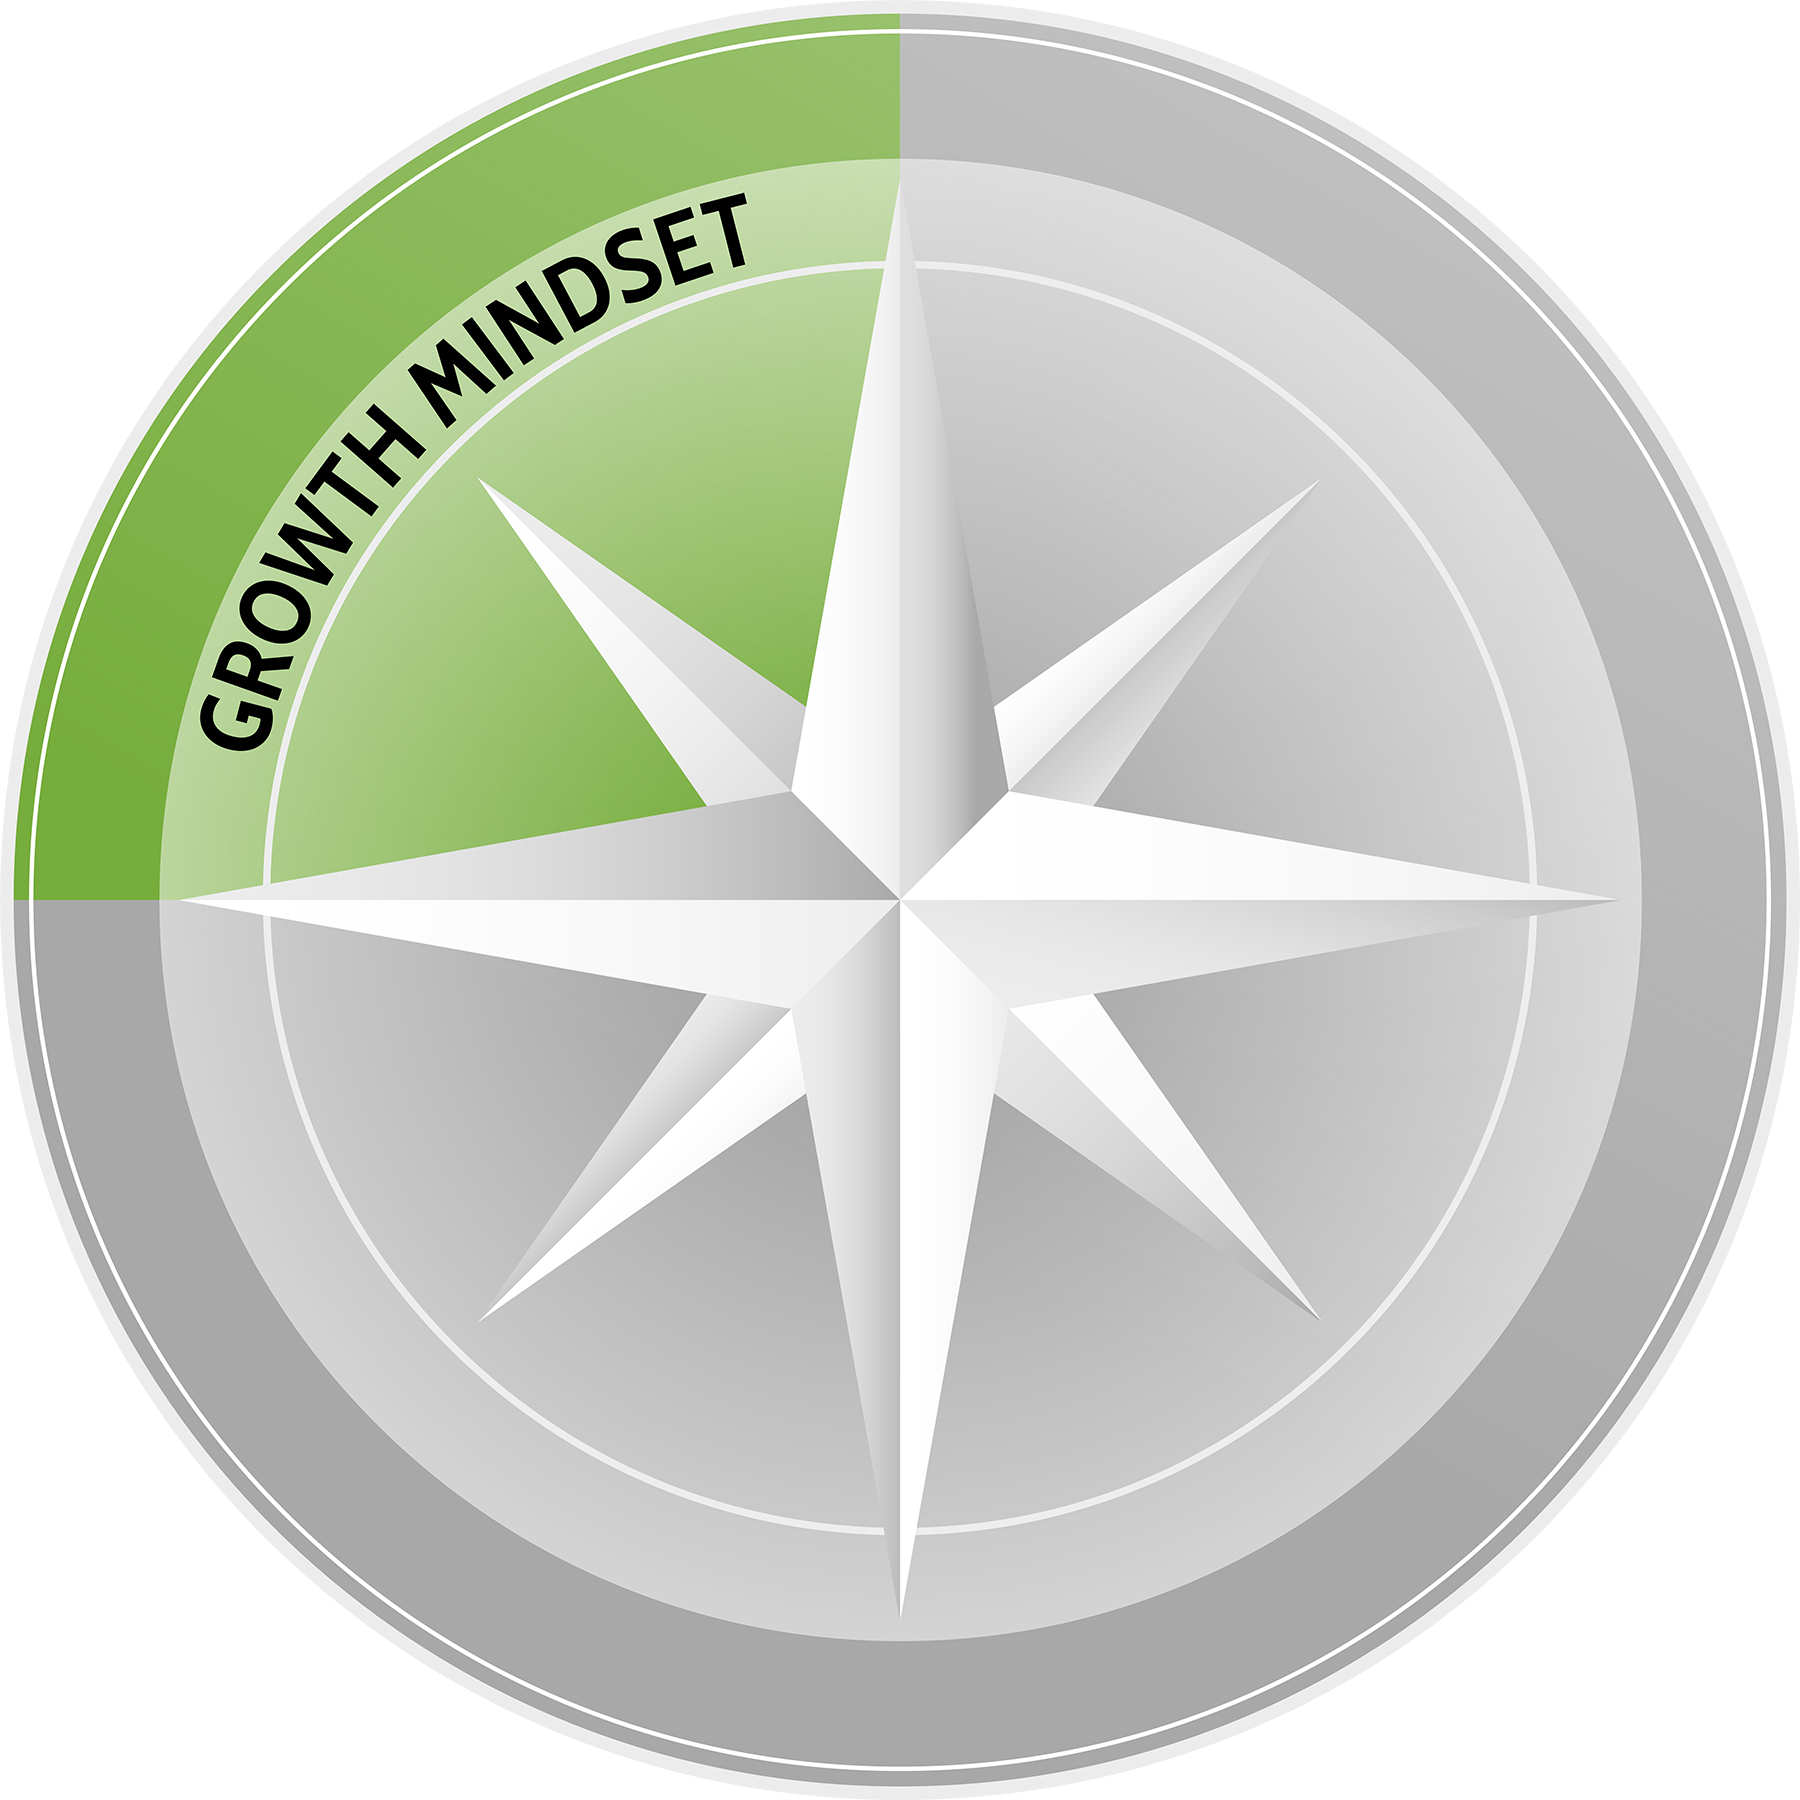 the top left quarter of the leadership journey compass in color with words growth mindset and the rest of the compass in grey scale without words